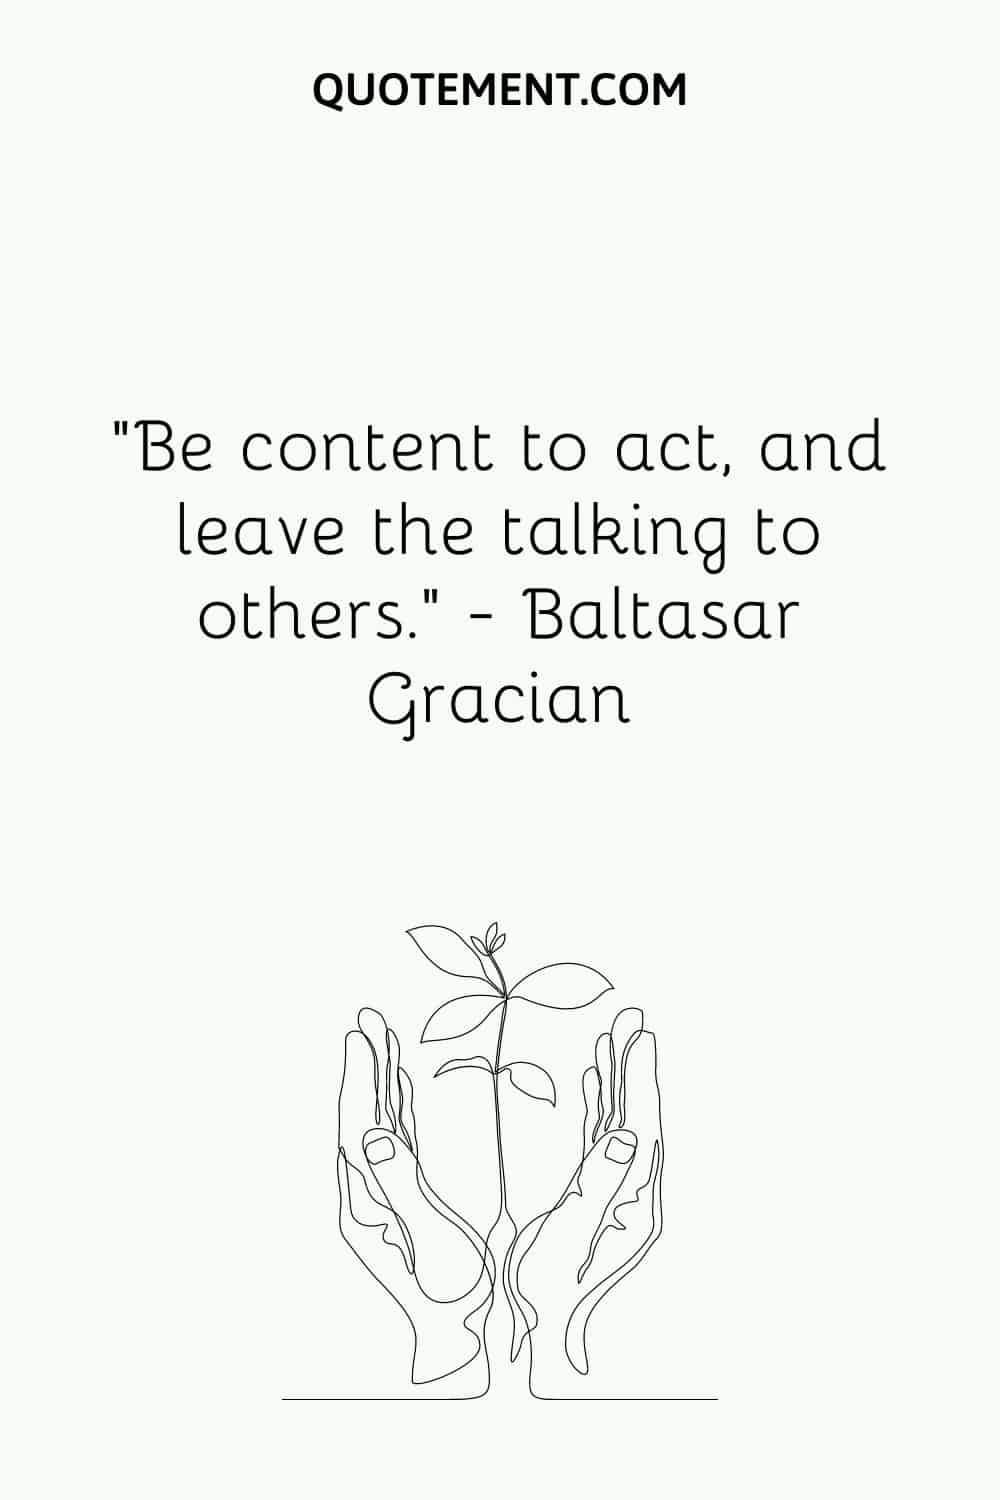 Be content to act, and leave the talking to others